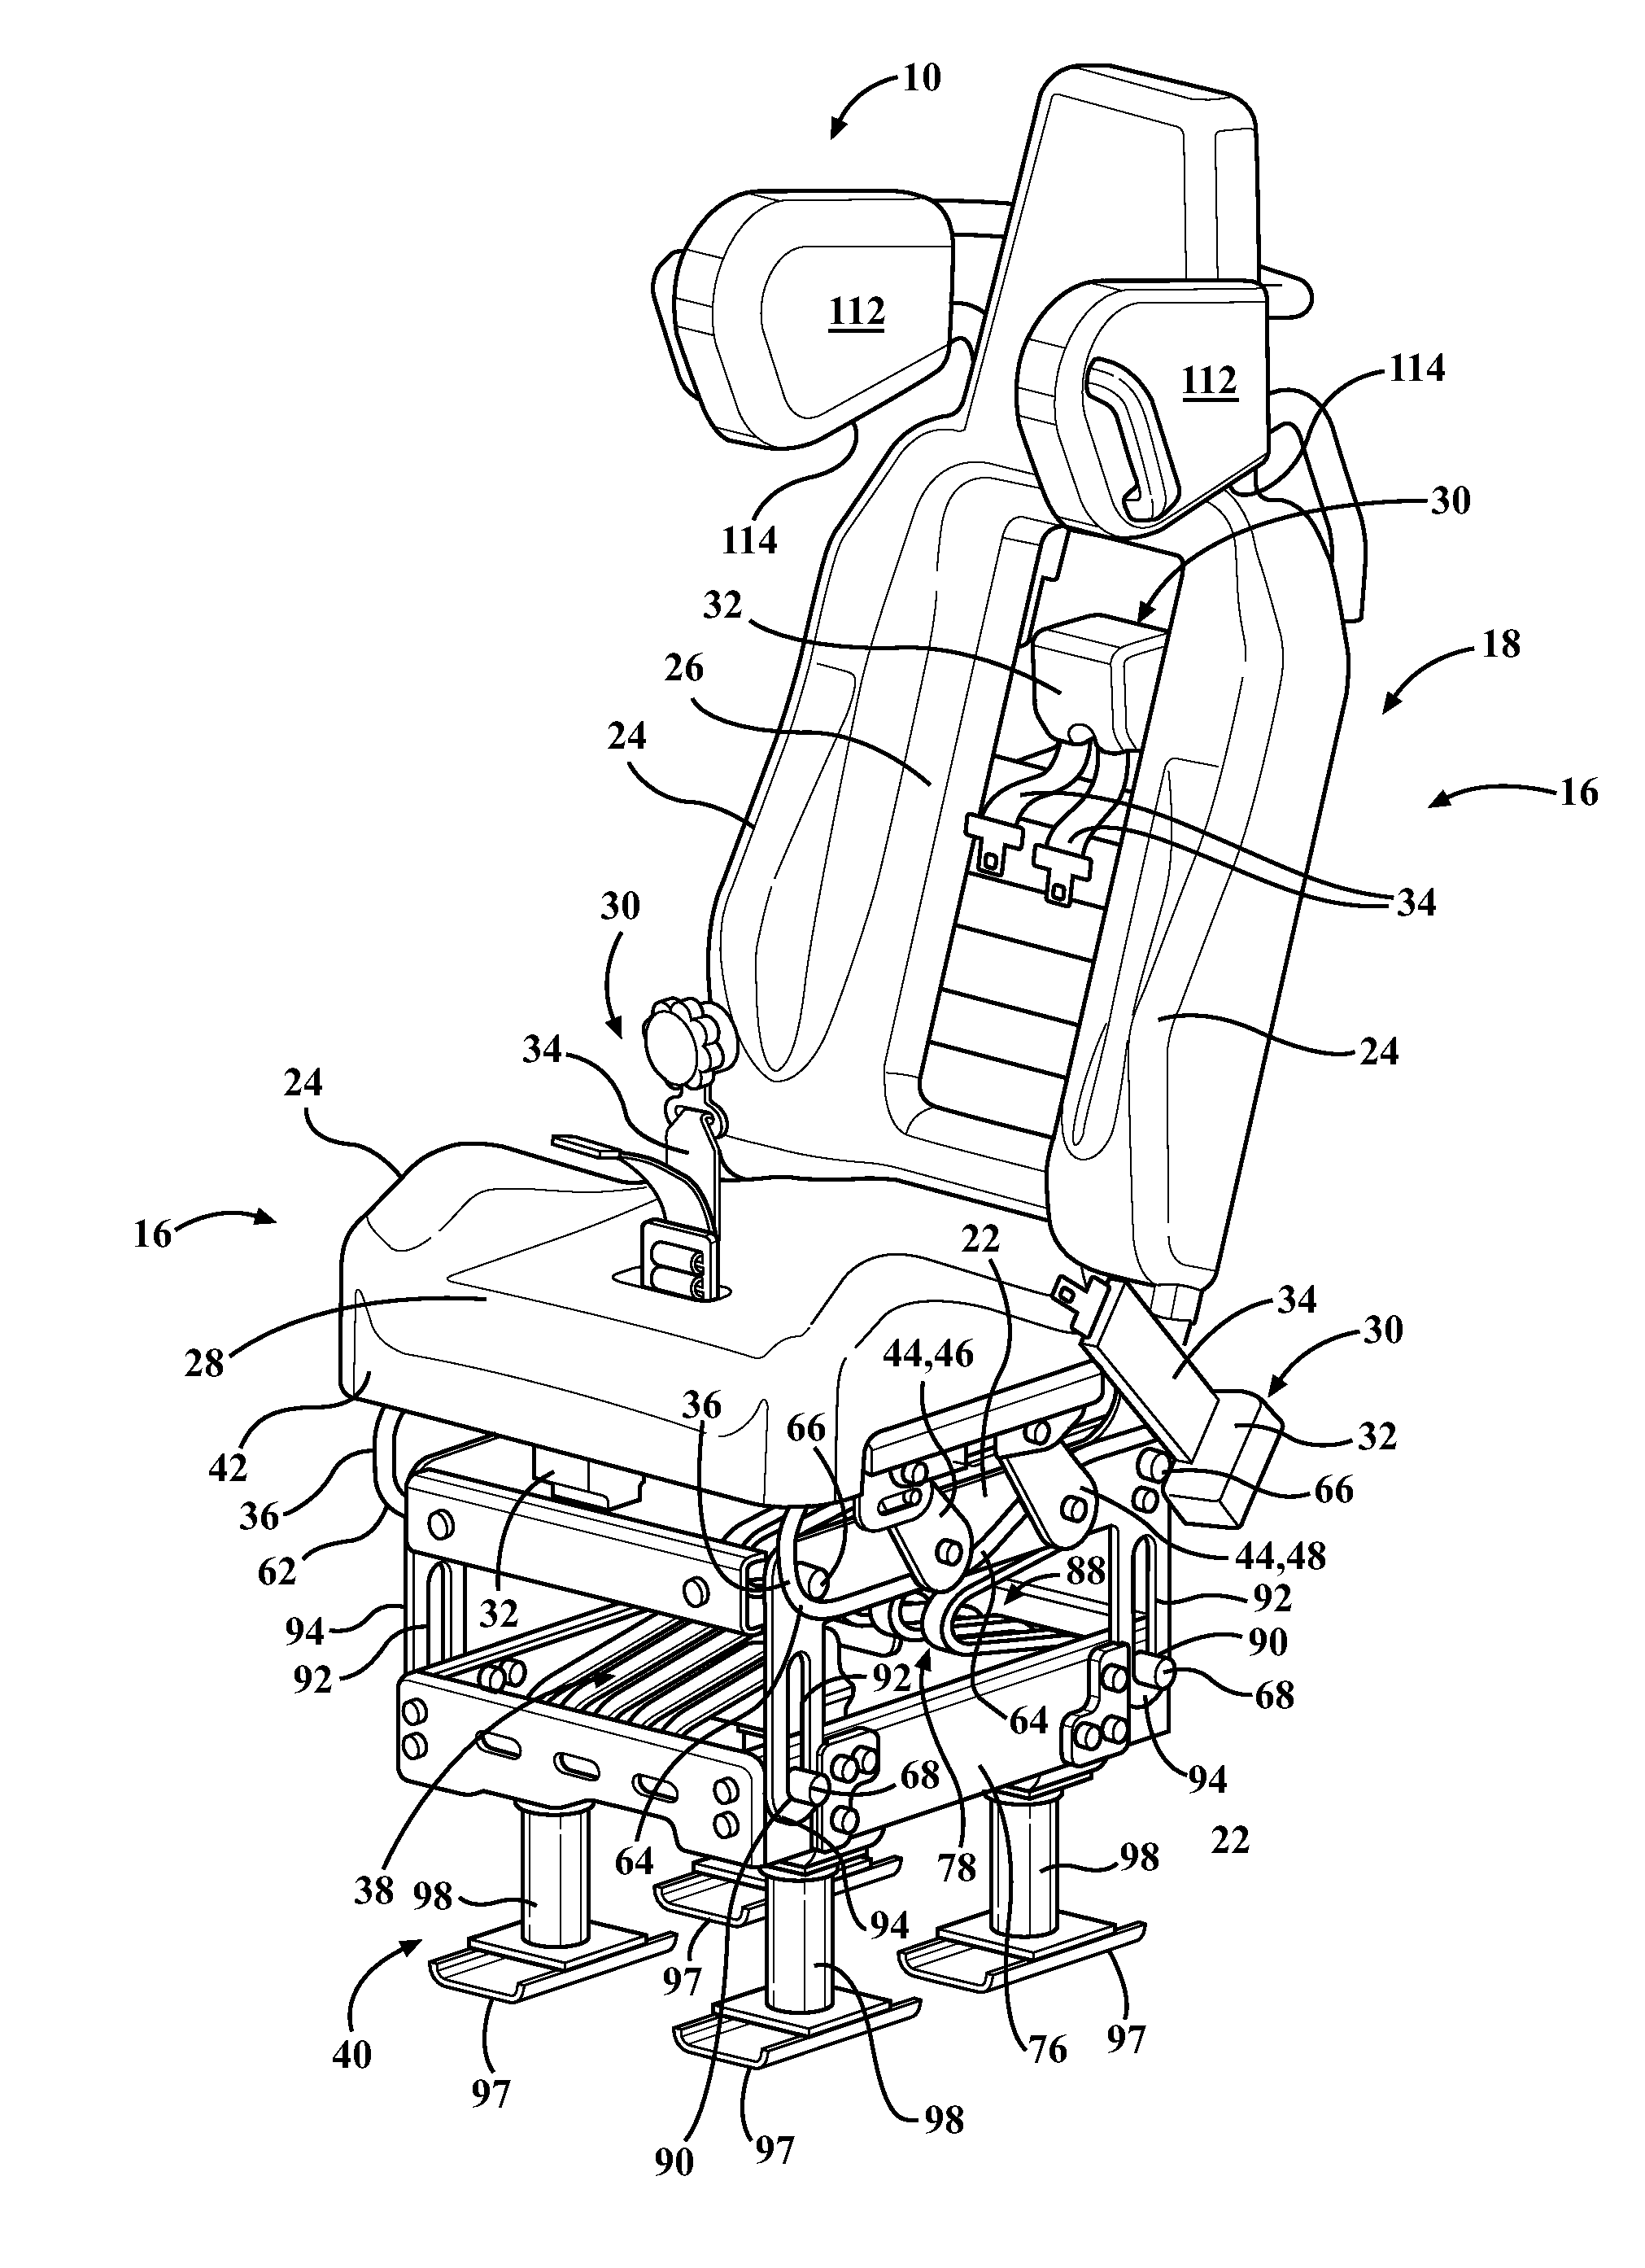 Energy absorbing device for a seat of a vehicle